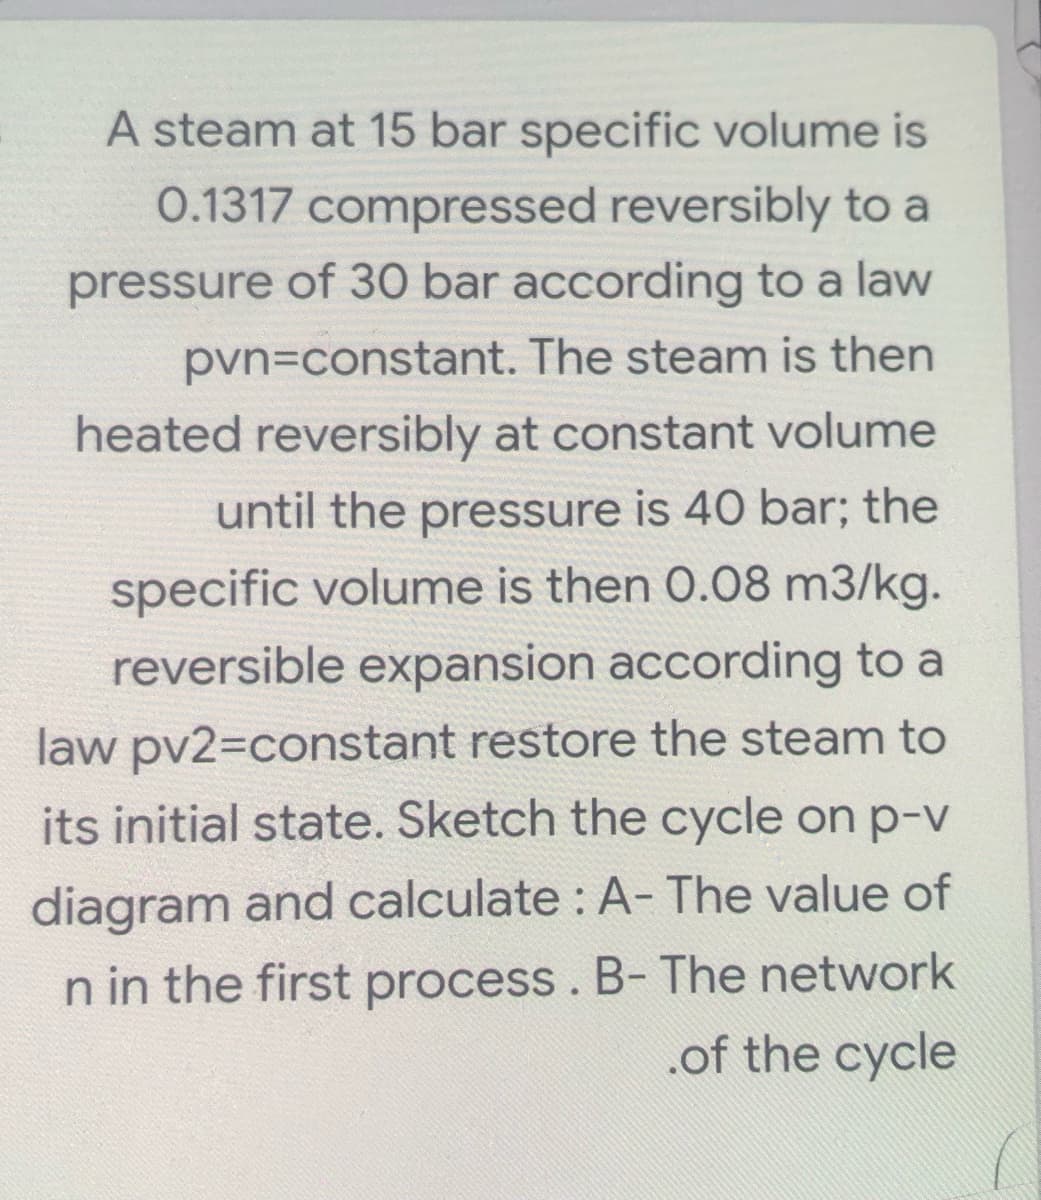 A steam at 15 bar specific volume is
0.1317 compressed reversibly to a
pressure of 30 bar according to a law
pvn=constant. The steam is then
heated reversibly at constant volume
until the pressure is 40 bar; the
specific volume is then 0.08 m3/kg.
reversible expansion according to a
law pv2=constant restore the steam to
its initial state. Sketch the cycle on p-v
diagram and calculate : A- The value of
n in the first process . B- The network
.of the cycle
